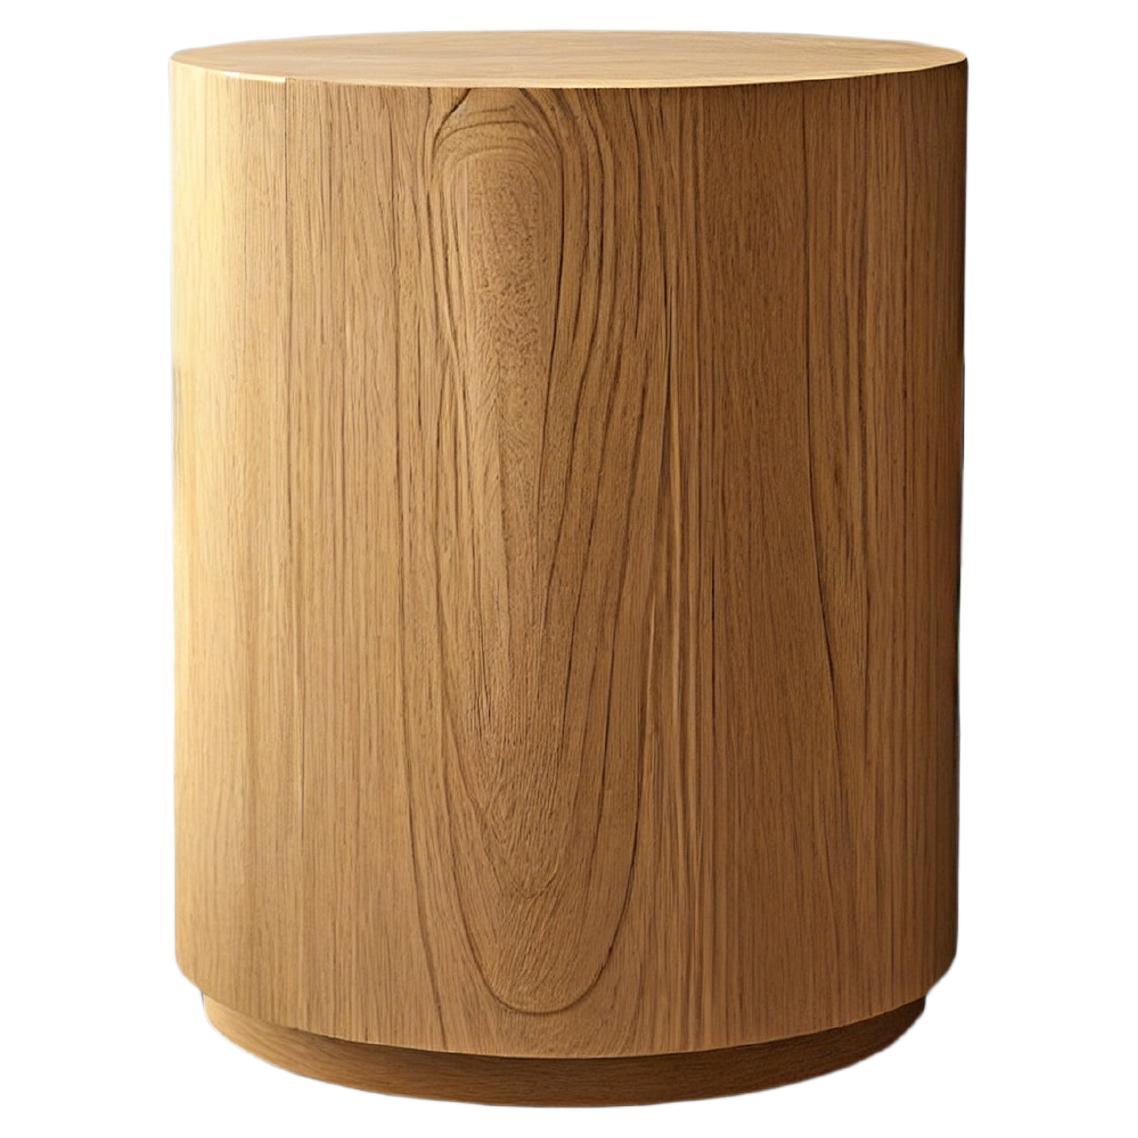 Round Side Table Made of Oak Veneer by Nono Furniture